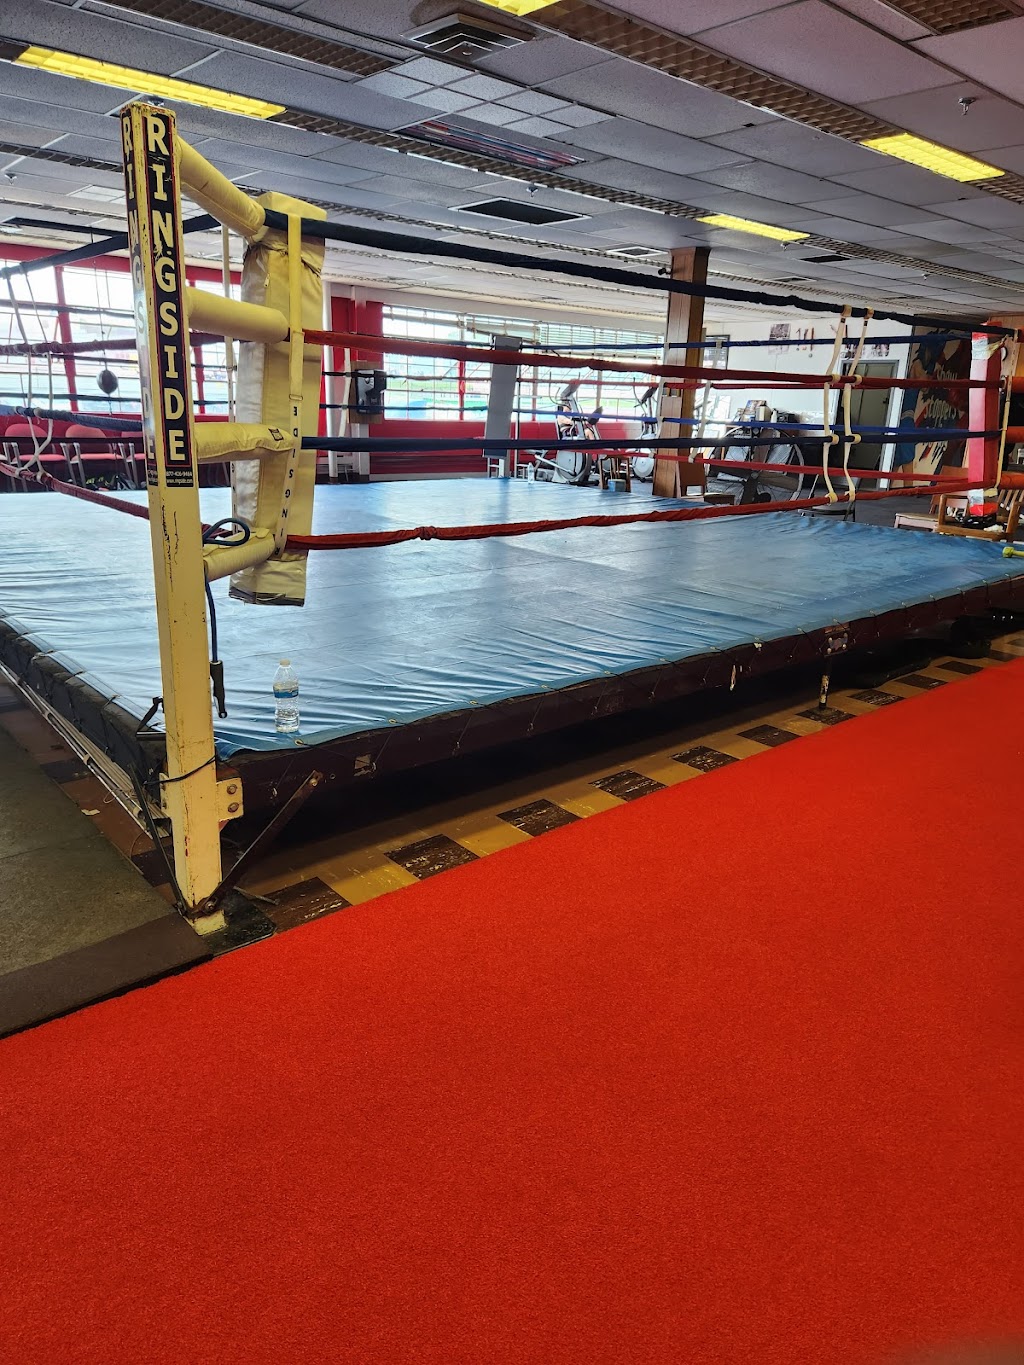 Show Stoppers Boxing Gym | 1801 S 12th St, Allentown, PA 18103 | Phone: (484) 478-4541